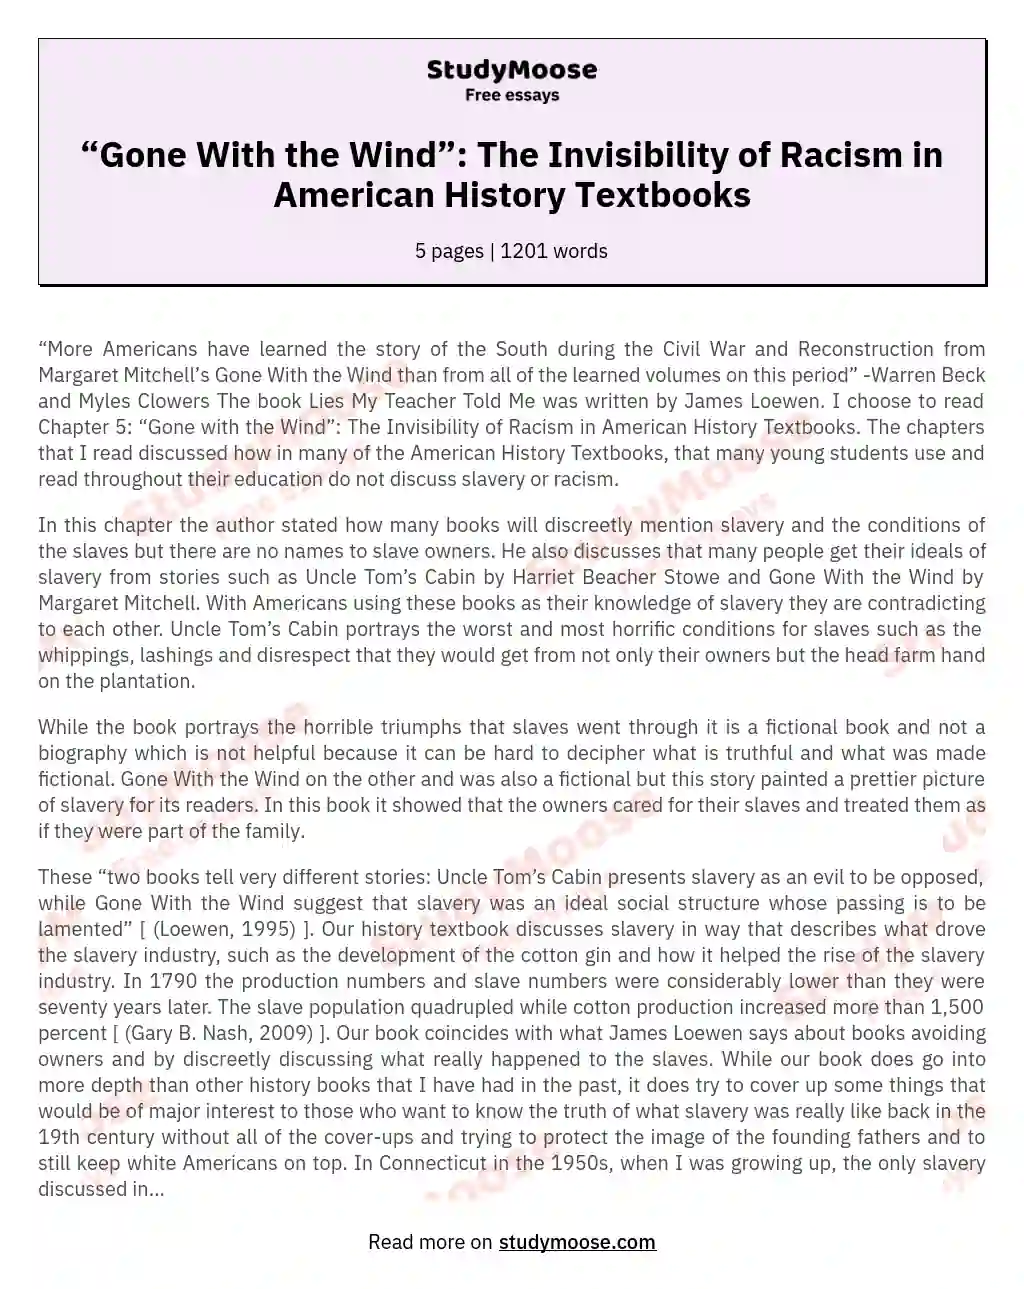 “Gone With the Wind”: The Invisibility of Racism in American History Textbooks